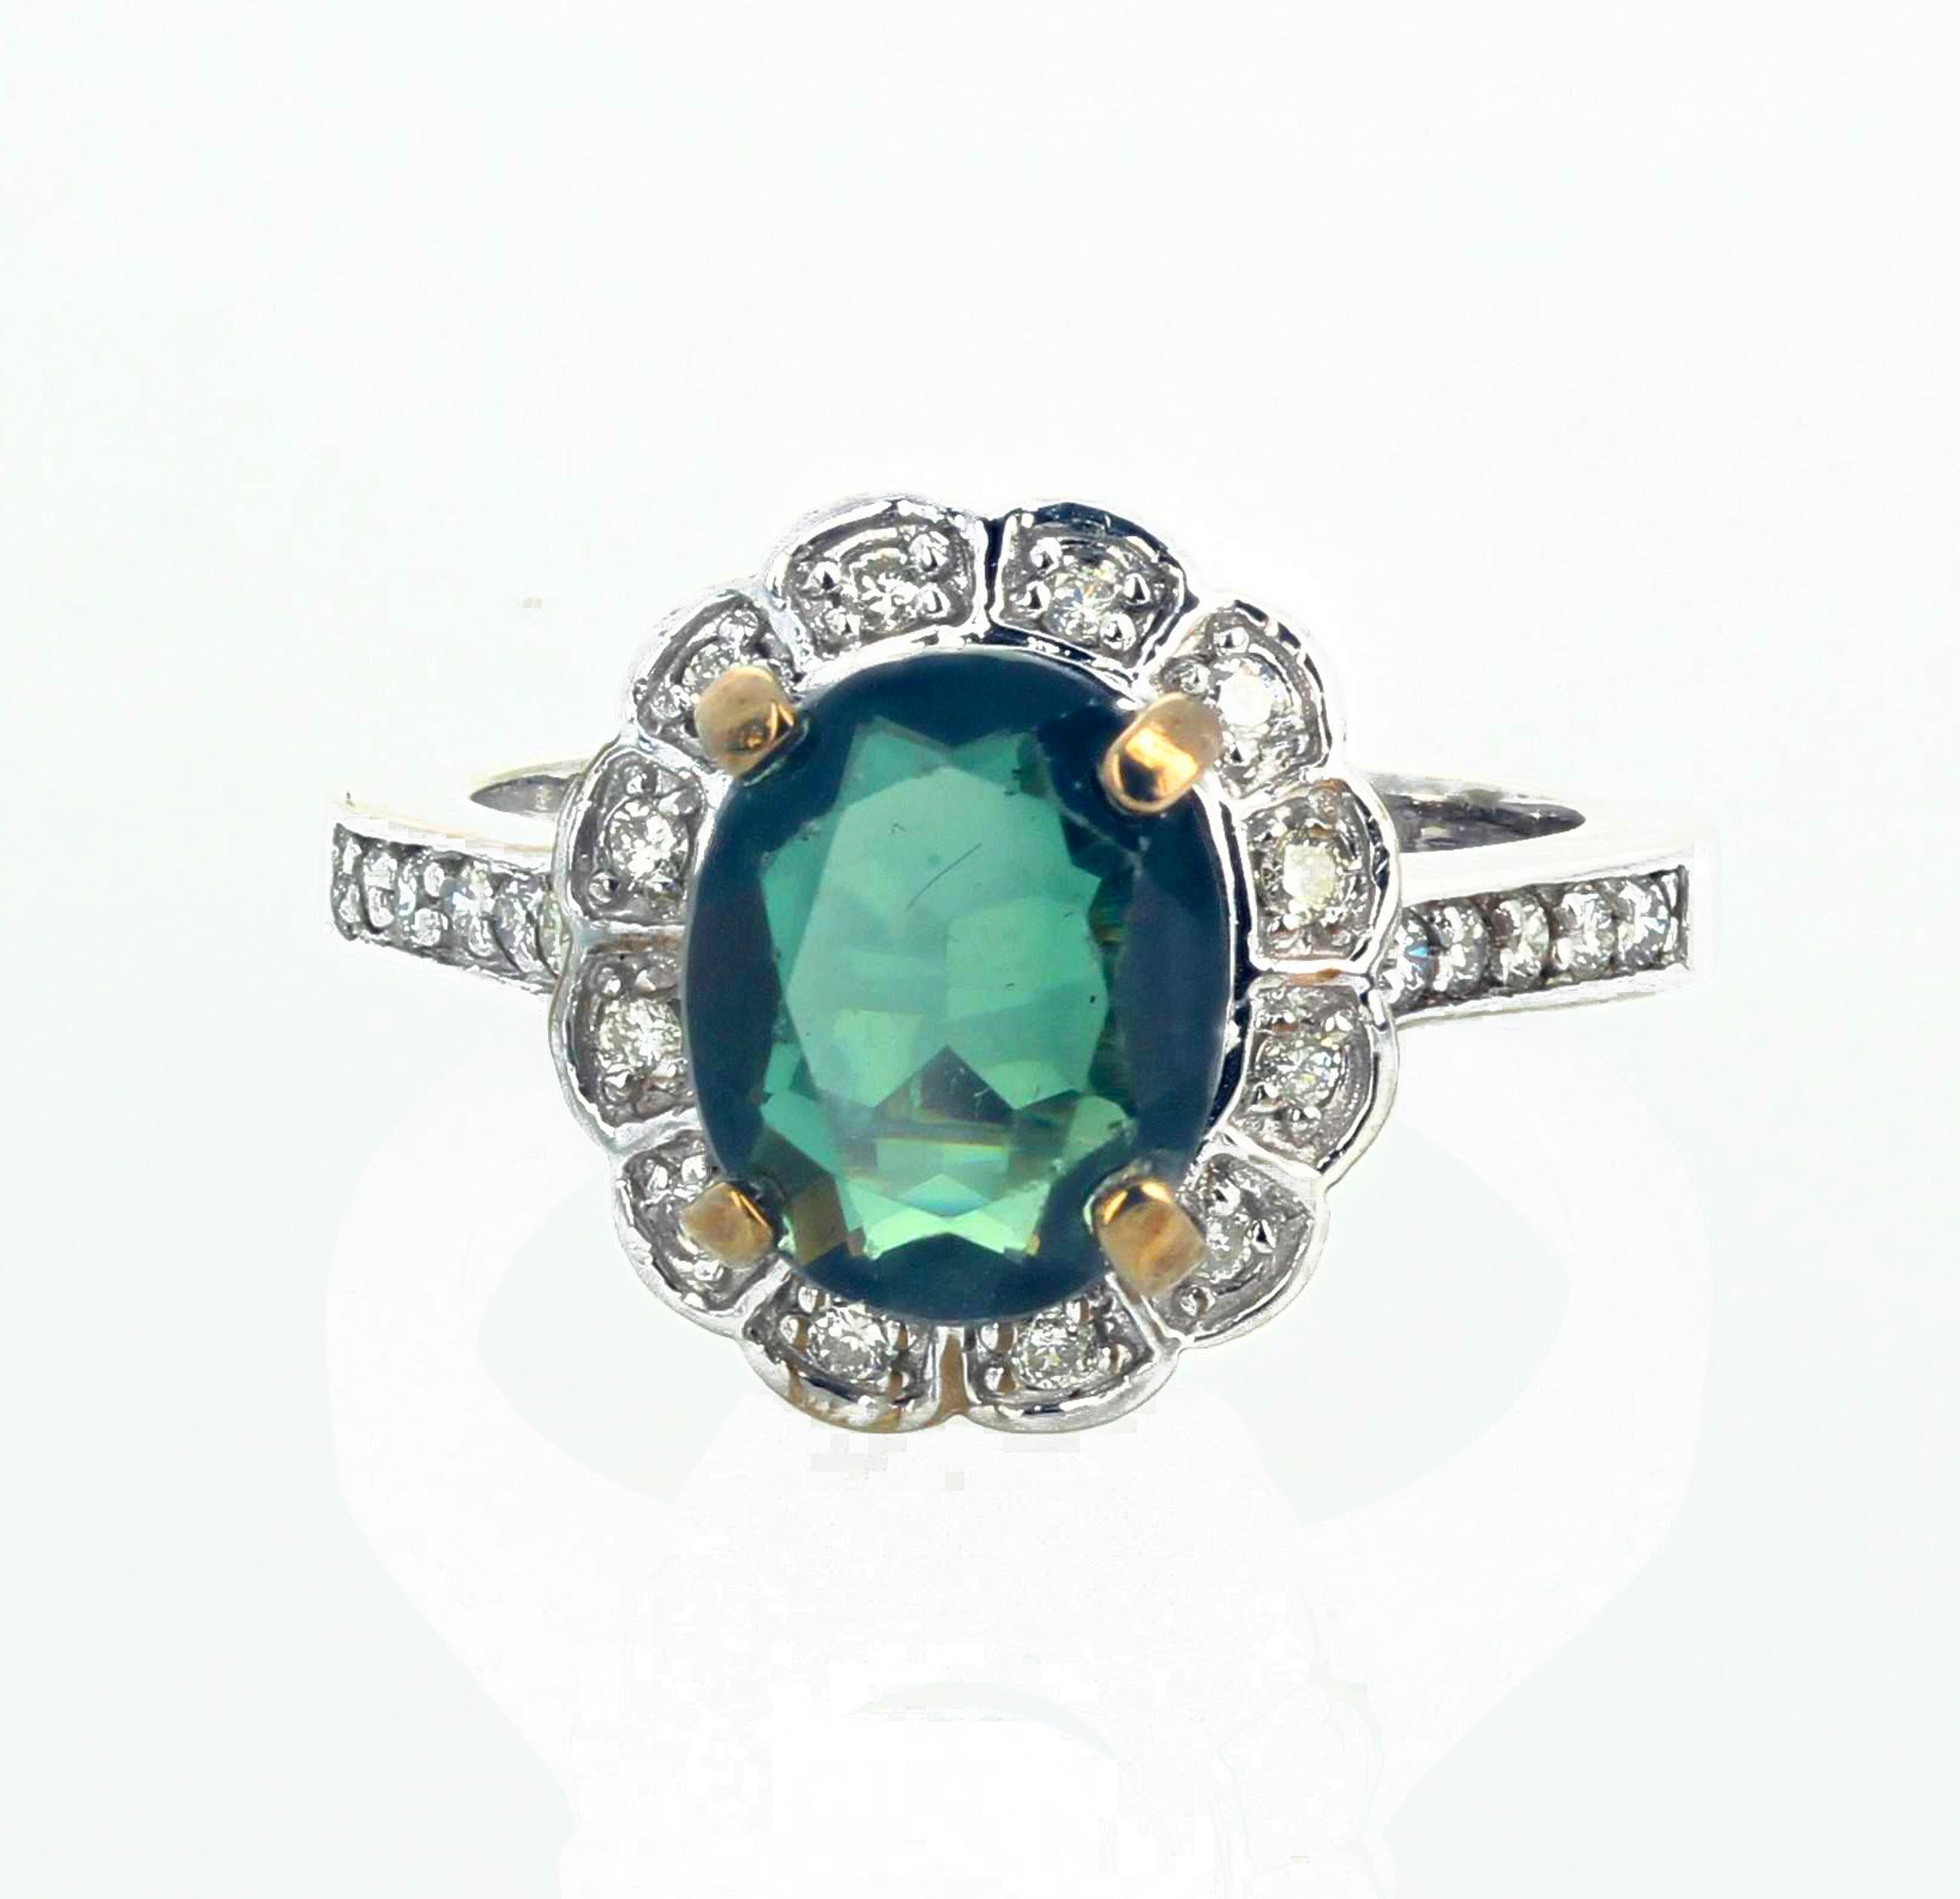 AJD Intensely Glowing 2.23 Ct Green Apatite & White Diamonds Ring For Sale 3